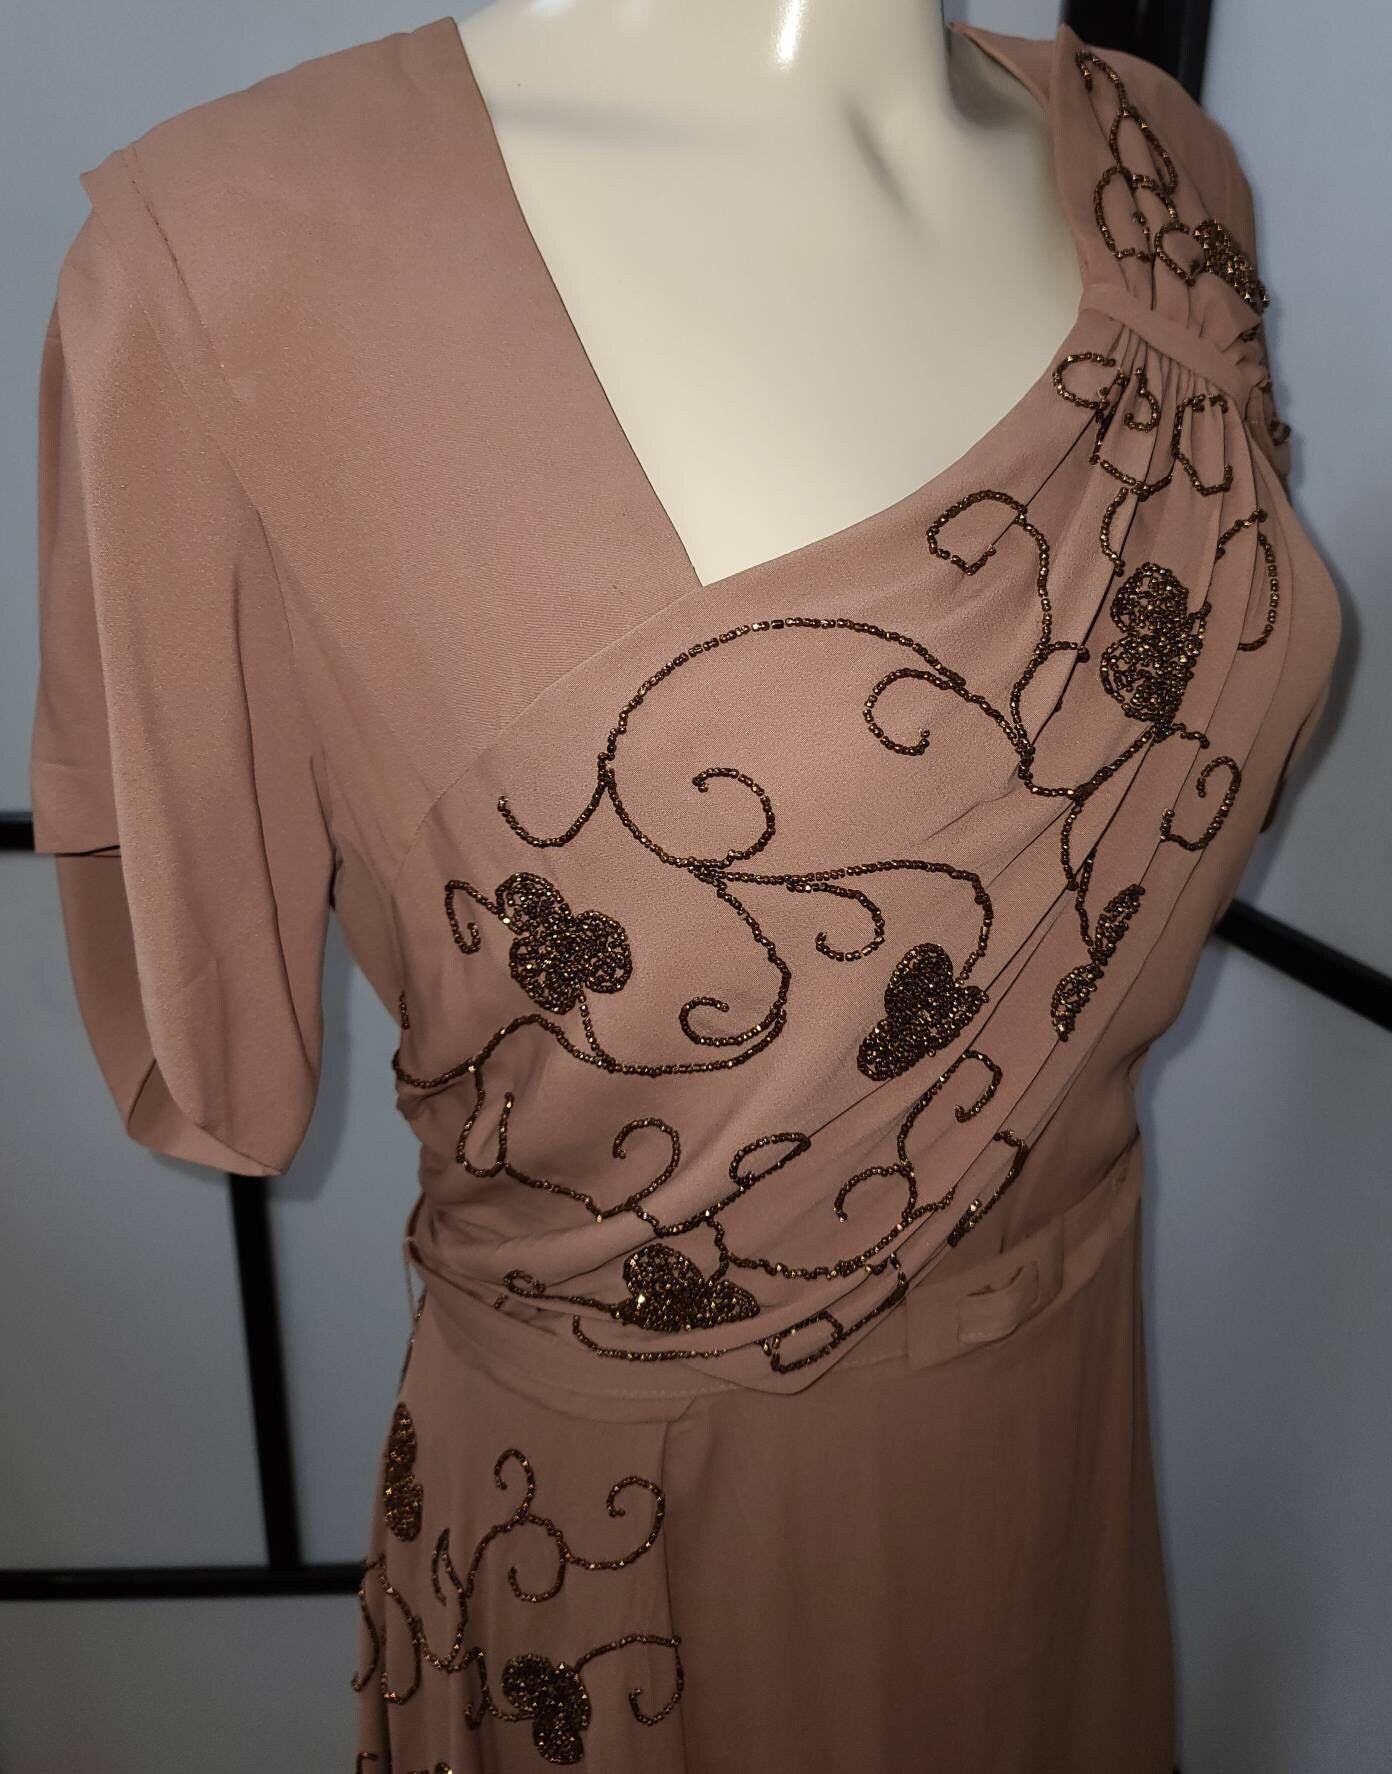 Vintage 1940s Dress Tan Mocha Rayon Crepe Tons of Tiny Copper Glass Seed Beads Floral Designs Mid Century Rockabilly XL